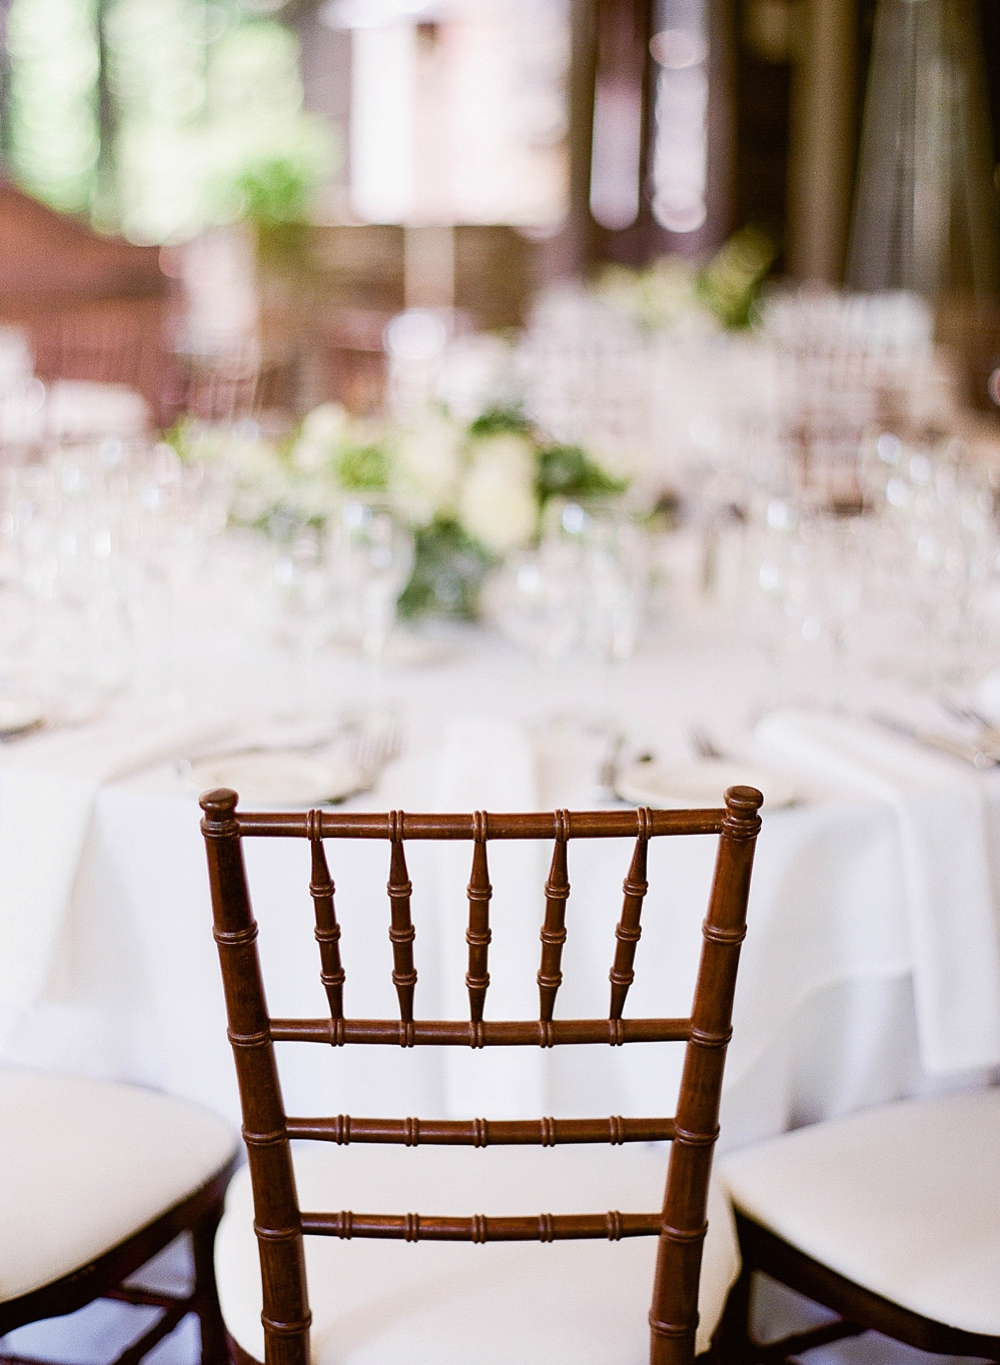 The Hillbrook Club Wedding in Cleveland, Ohio, Cleveland Wedding Venue, green and white centerpieces